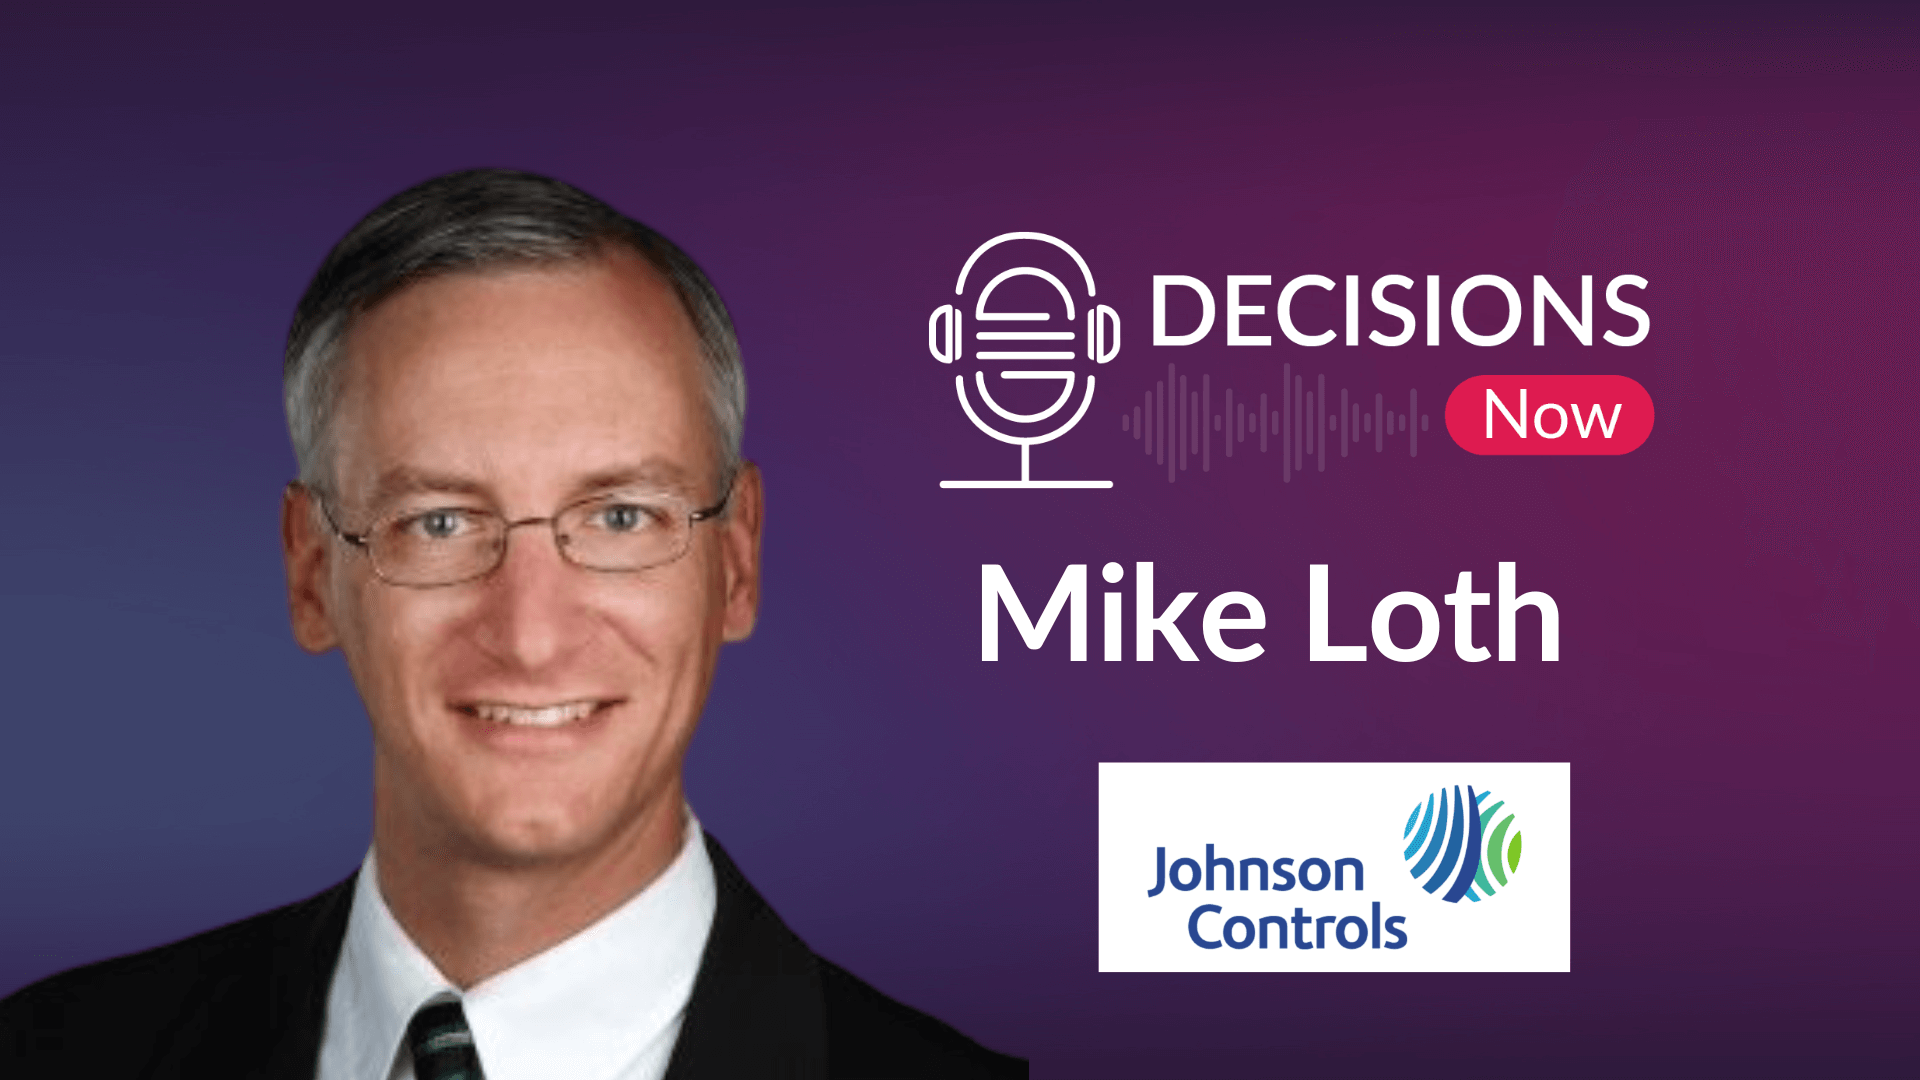 Decarbonizing Buildings with Mike Loth